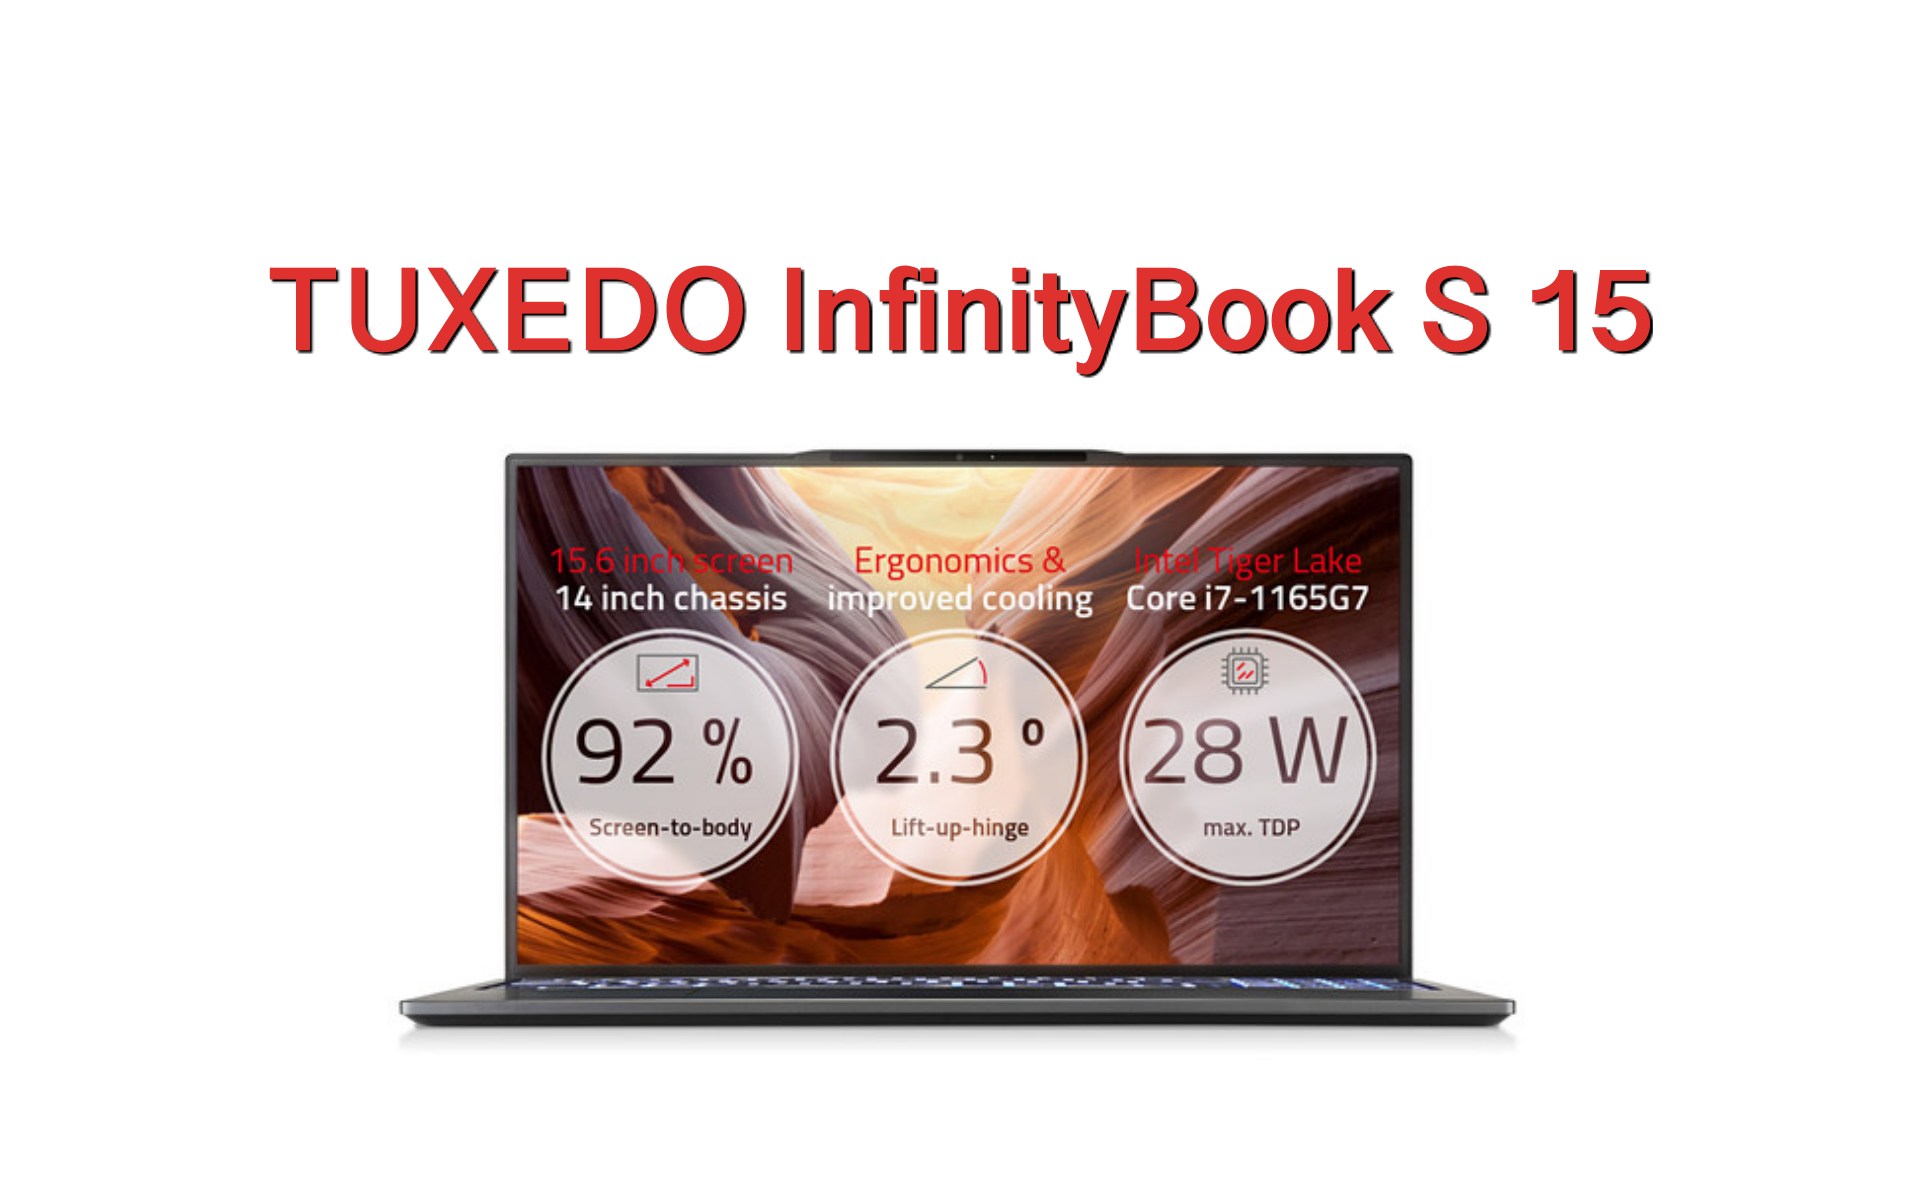 TUXEDO InfinityBook S 15 Linux Laptop Launches with Tiger Lake CPUs, Ultra Thin Design